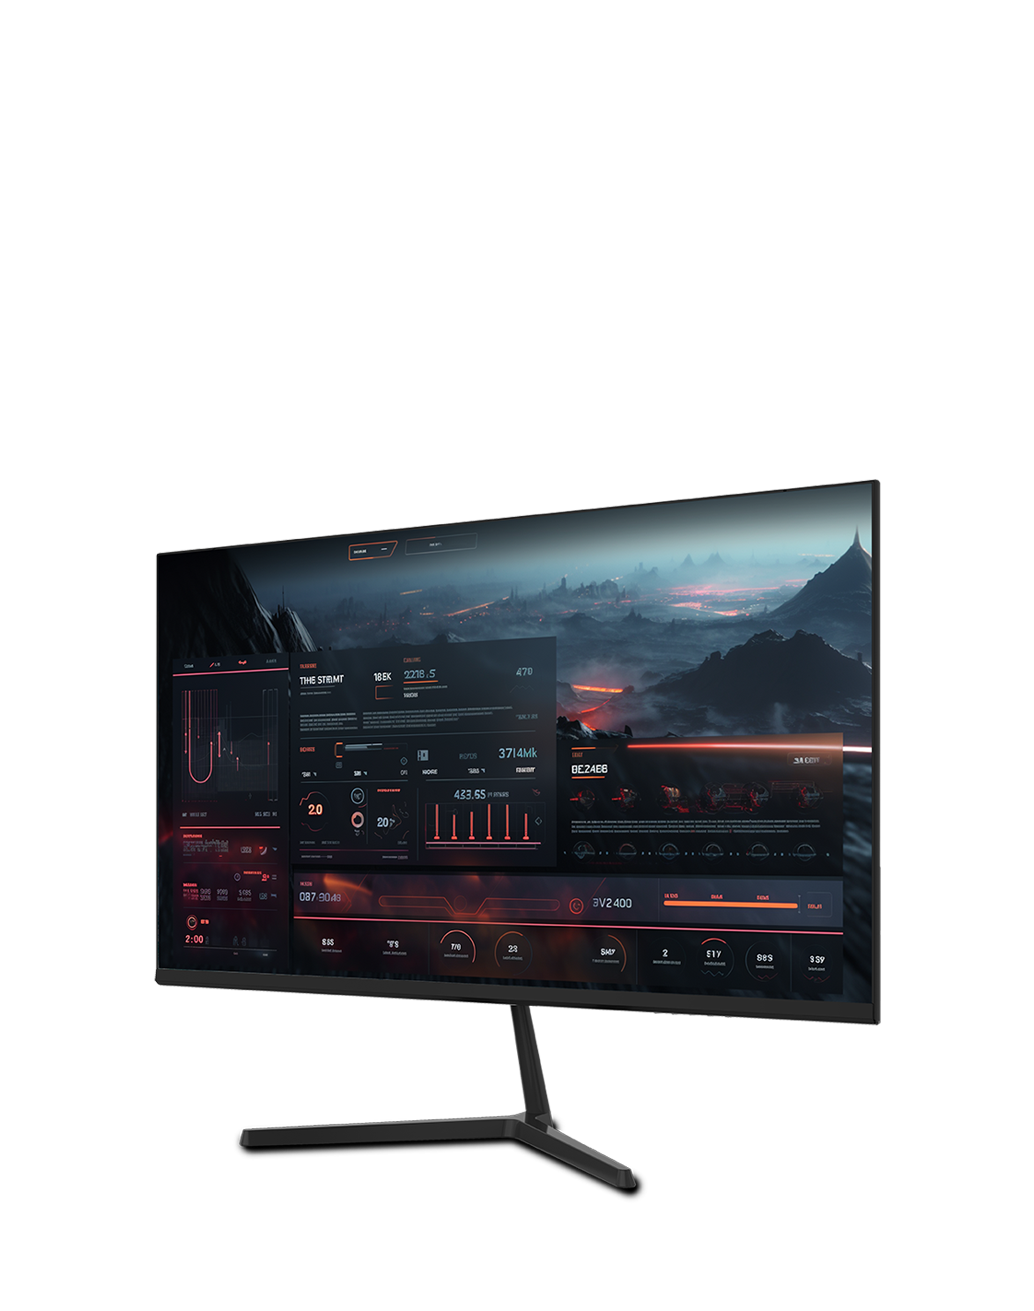 A 24 inch IPS Minifire X3 Business Monitor in FHD and 100Hz refresh rate displays high resolution gaming screen